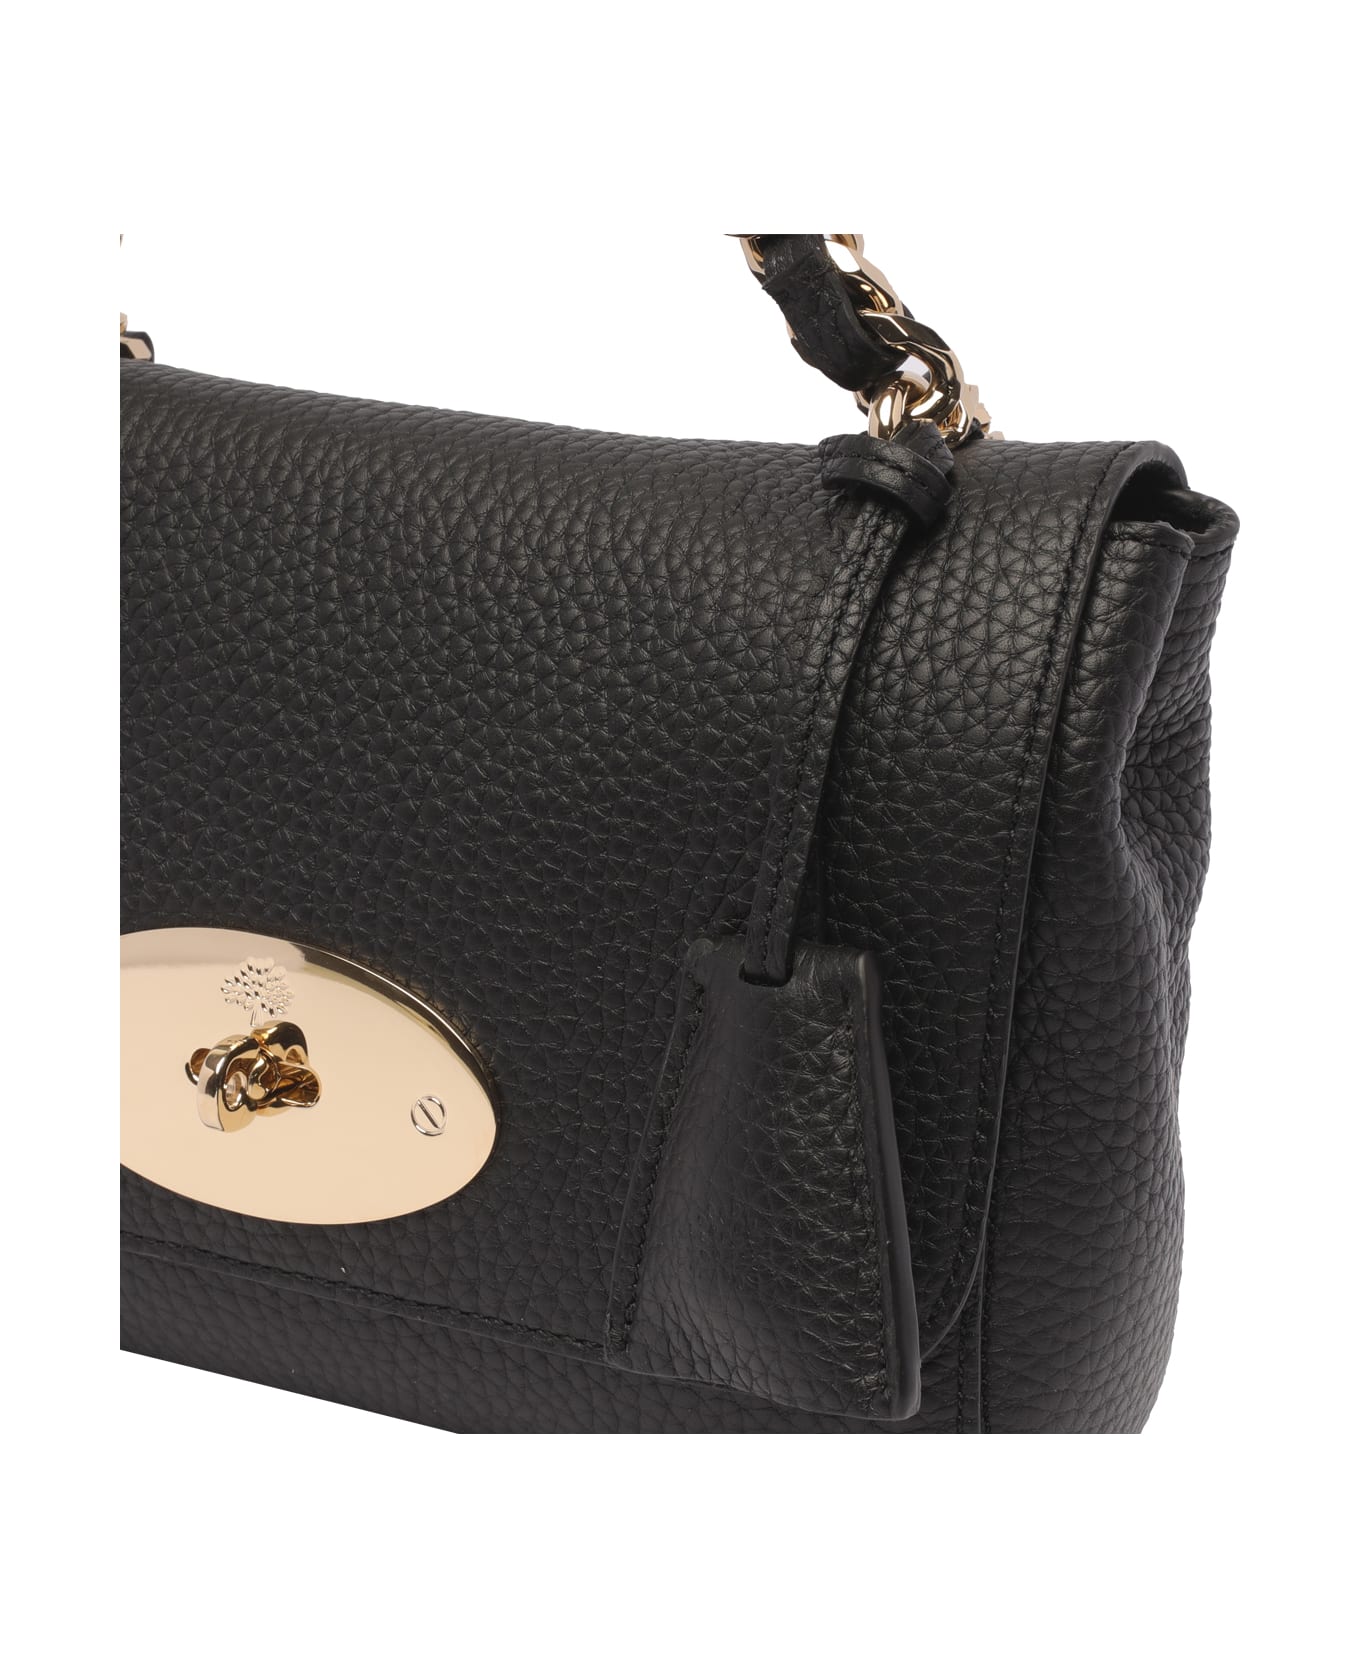 Mulberry Lily Top Handle Crossbody Bag - Black